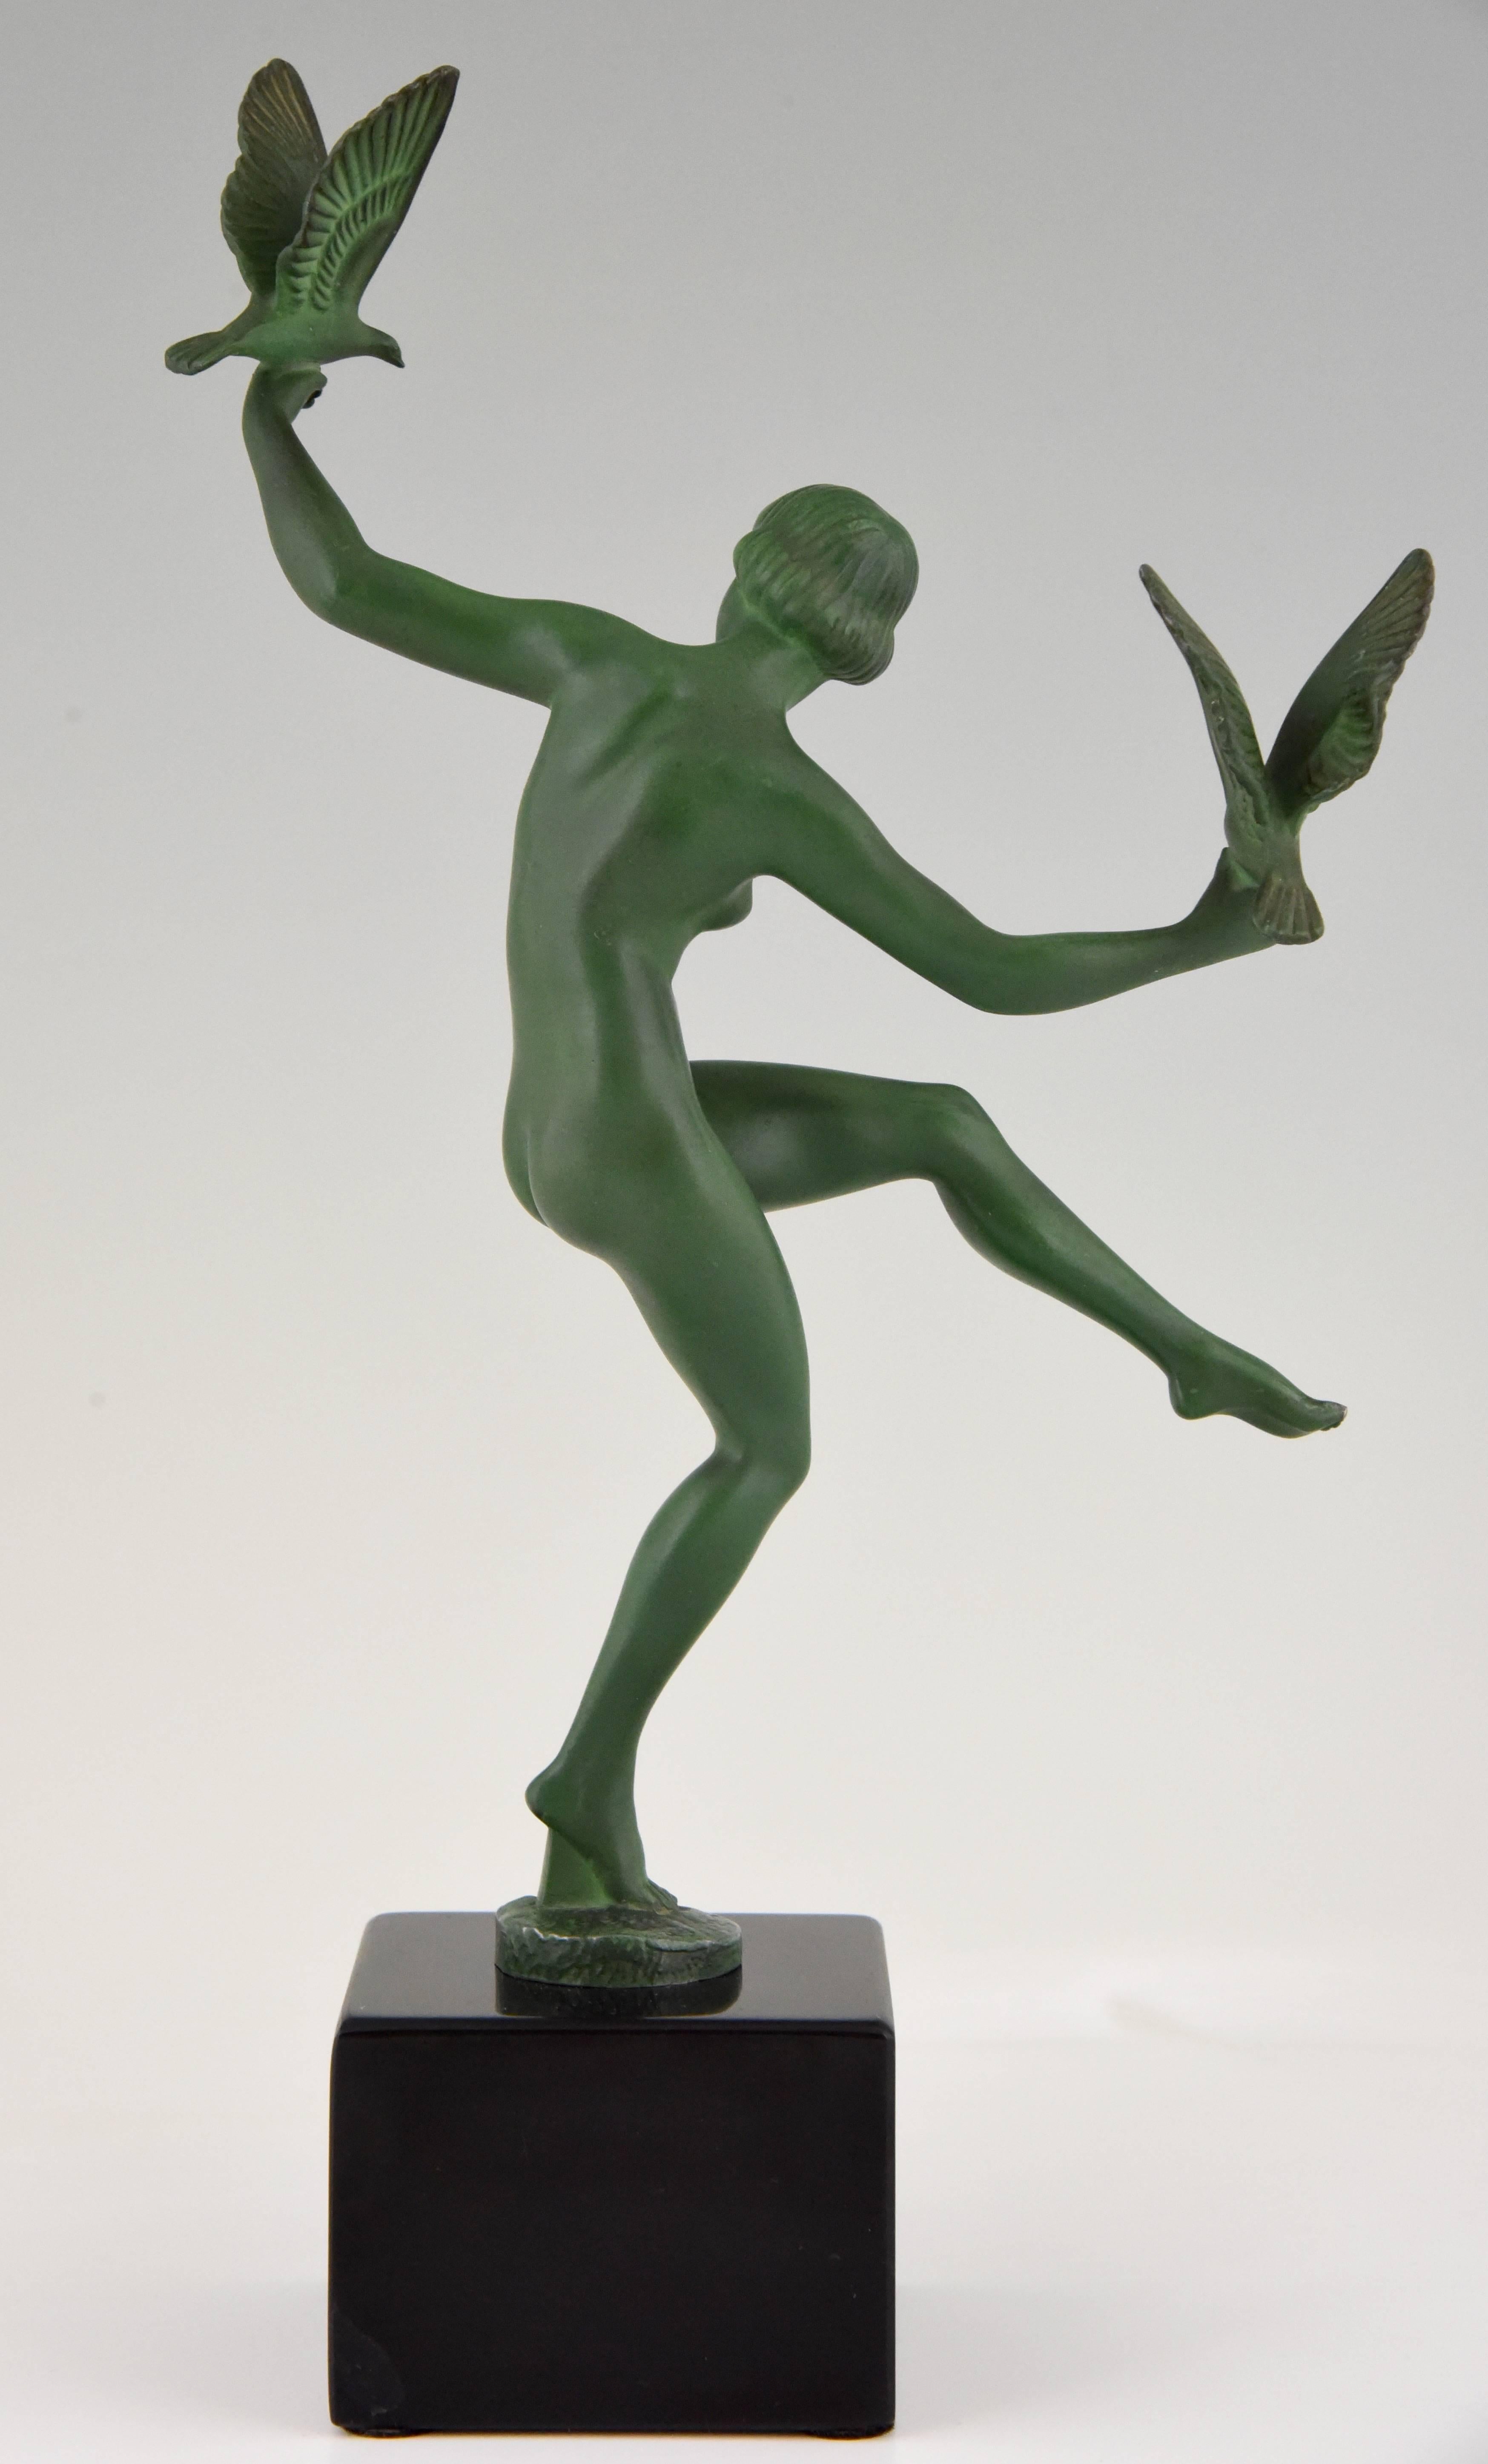 Patinated Art Deco Sculpture Nude Dancer with Birds by Briand, Marcel Bouraine 1930 France